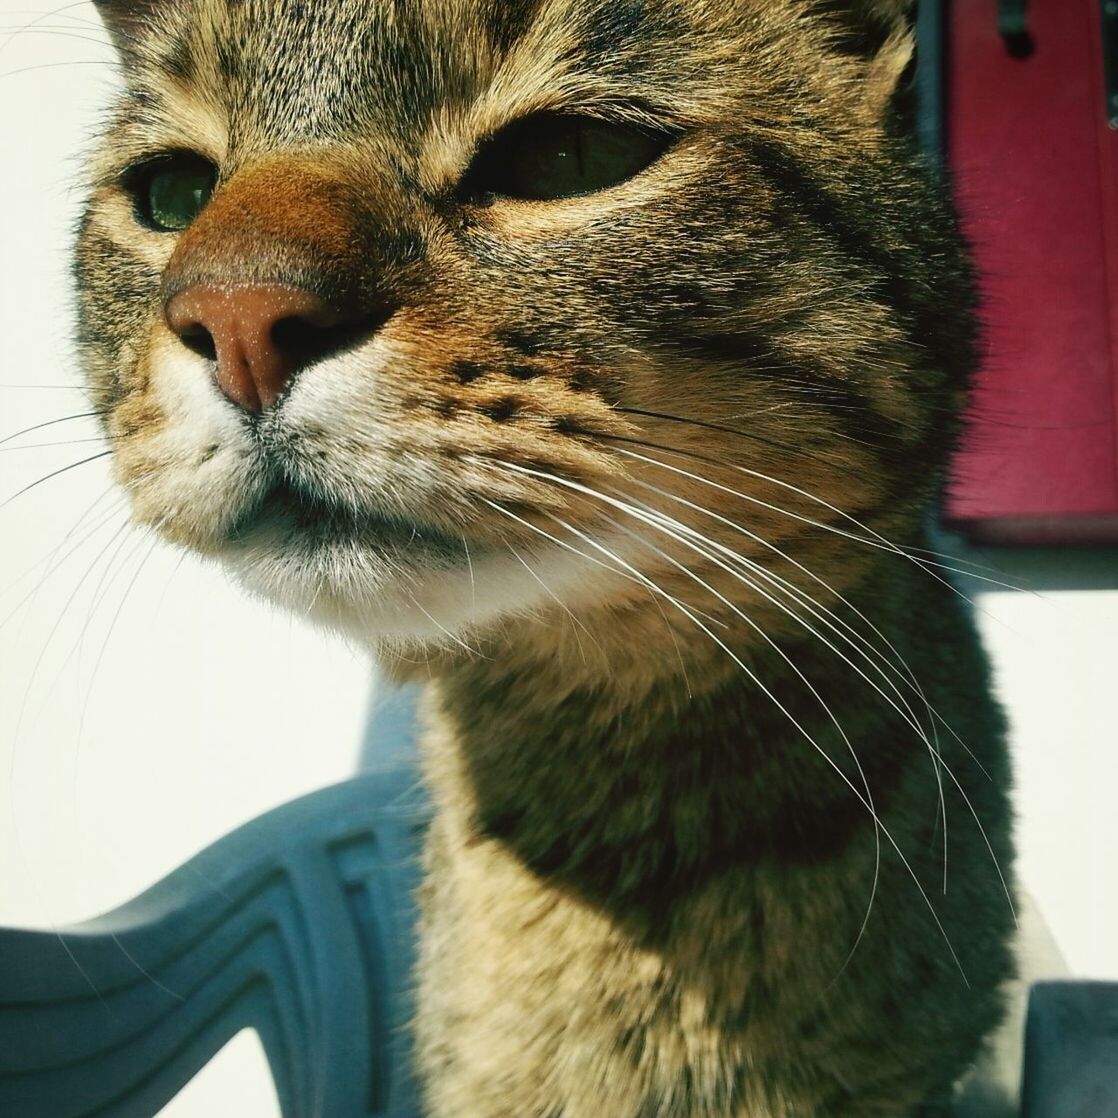 animal themes, one animal, mammal, domestic animals, pets, animal head, close-up, whisker, animal body part, feline, domestic cat, animal eye, cat, portrait, part of, snout, focus on foreground, looking away, vertebrate, indoors